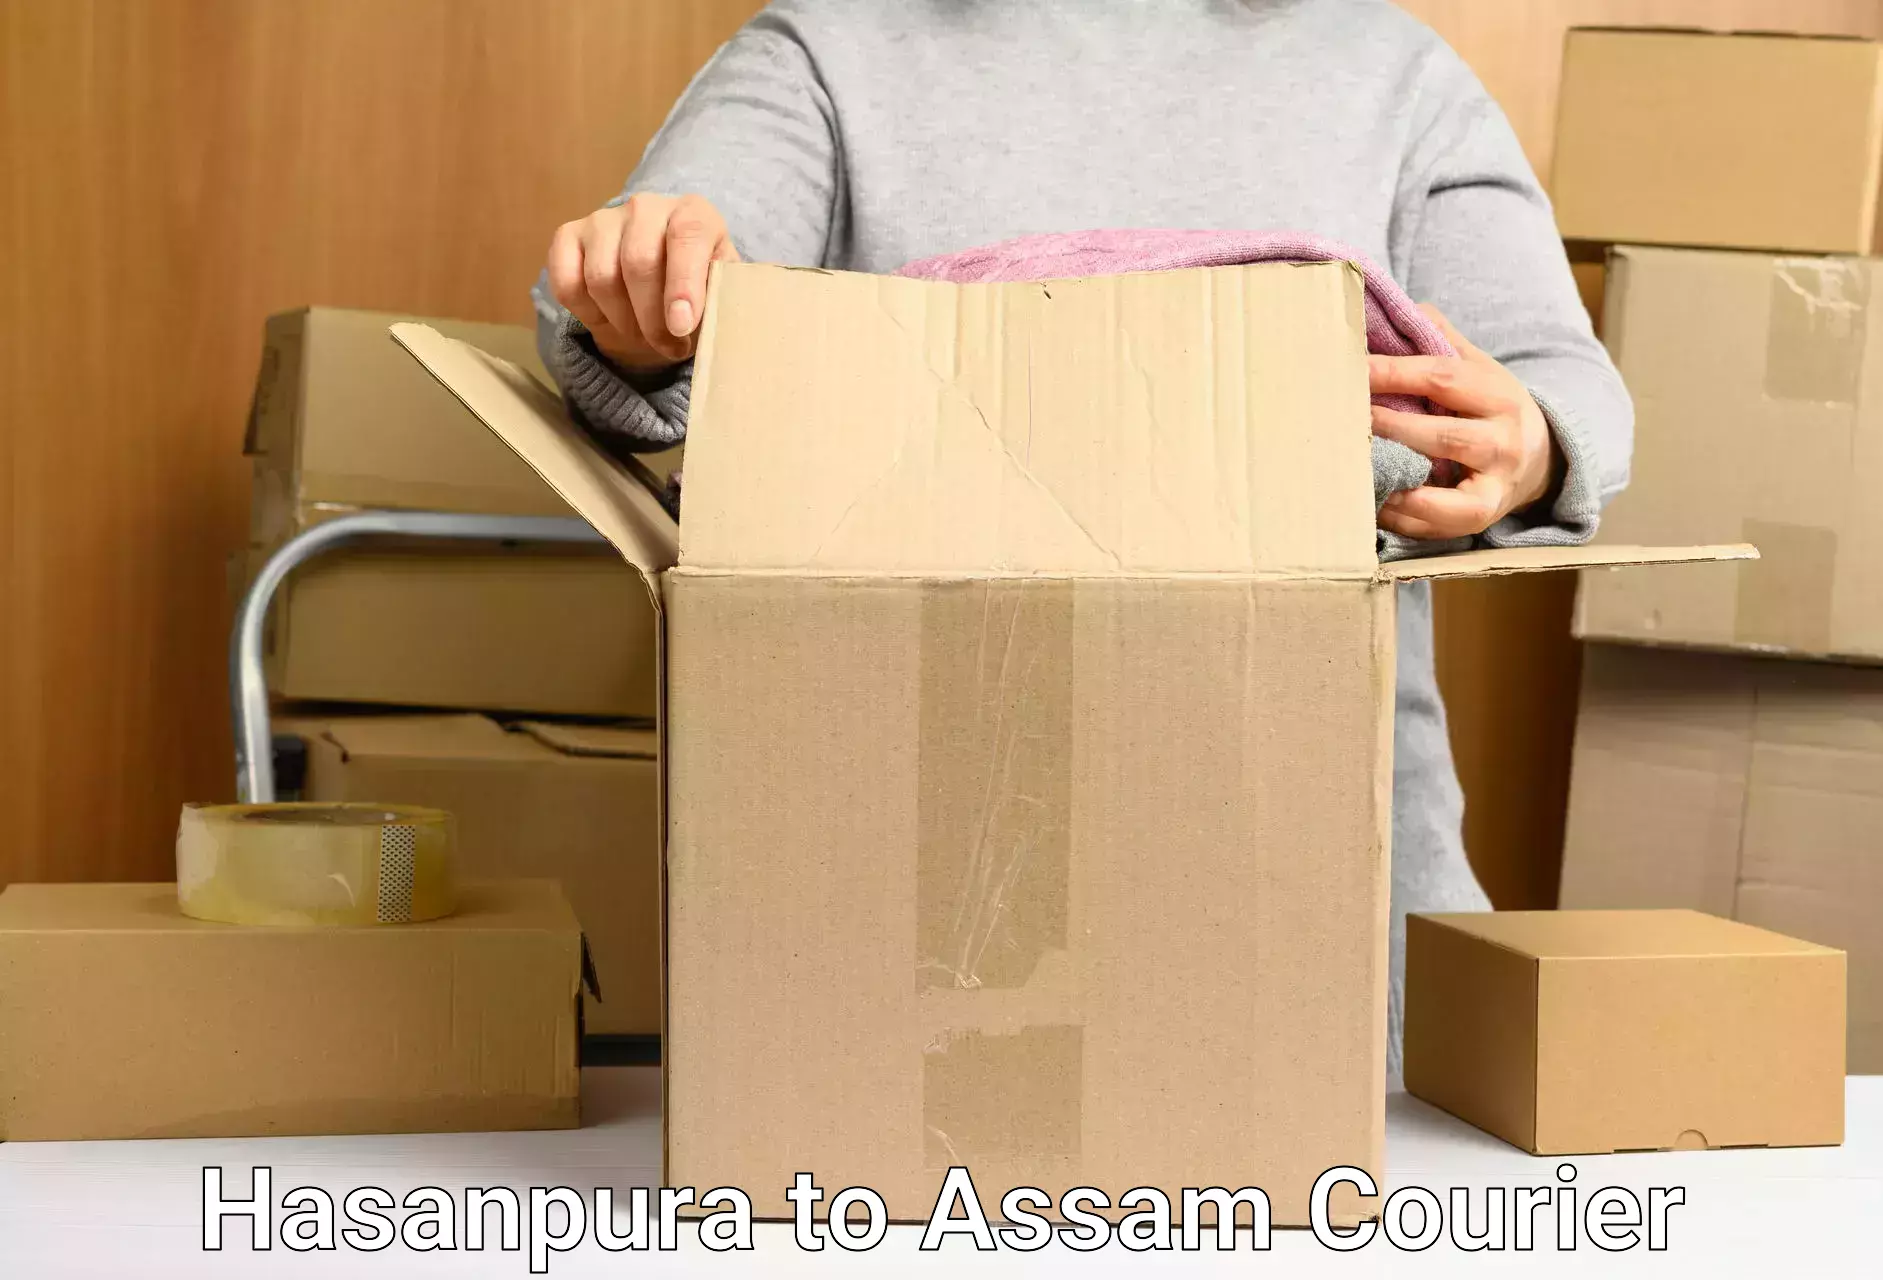 Delivery service partnership in Hasanpura to Assam